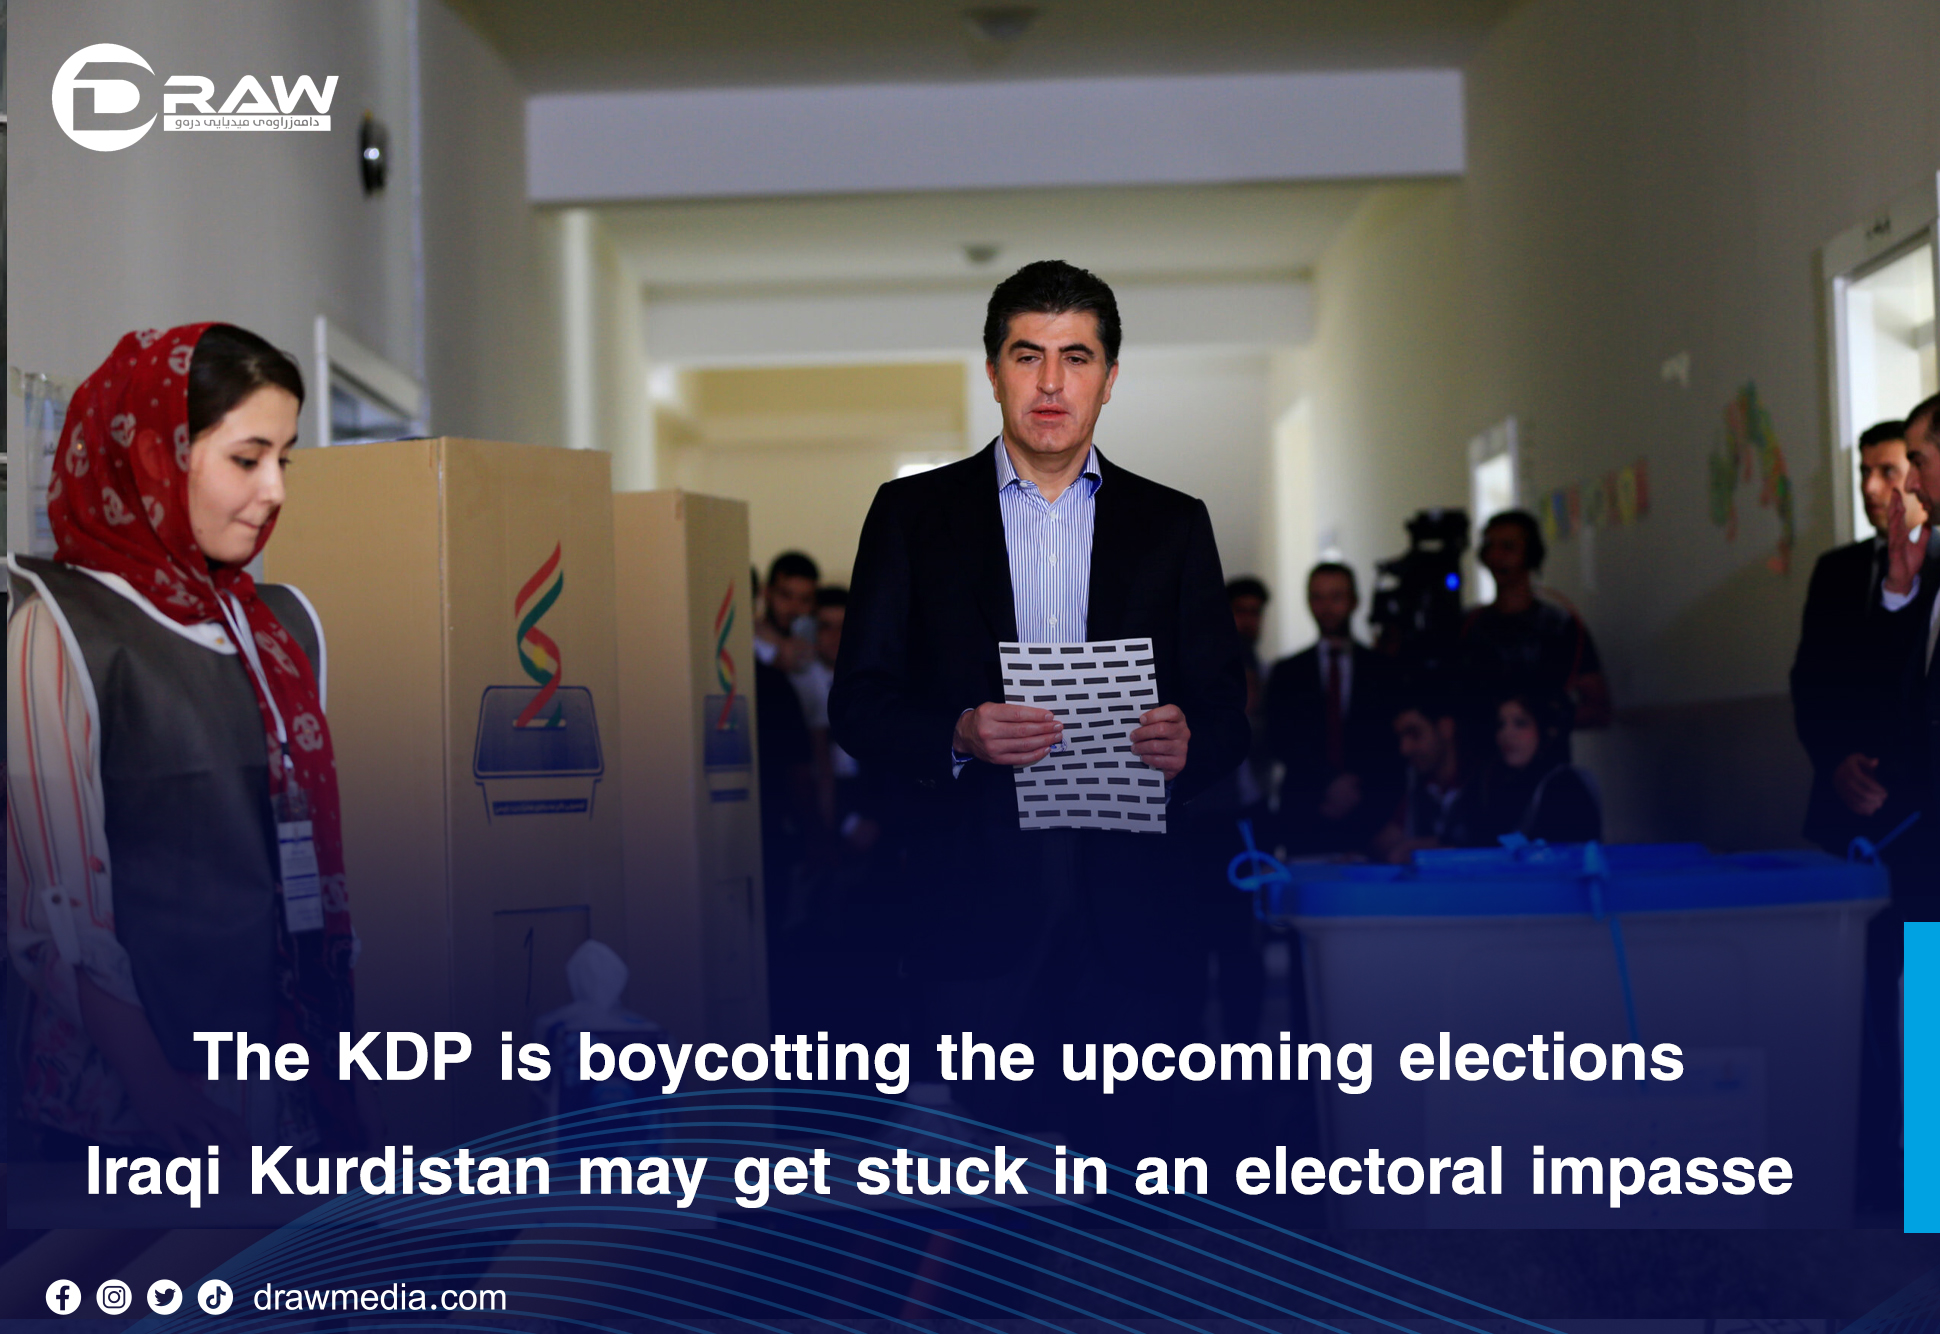 Draw Media- The KDP is boycotting the upcoming elections. Iraqi Kurdistan may get stuck in an electoral impasse